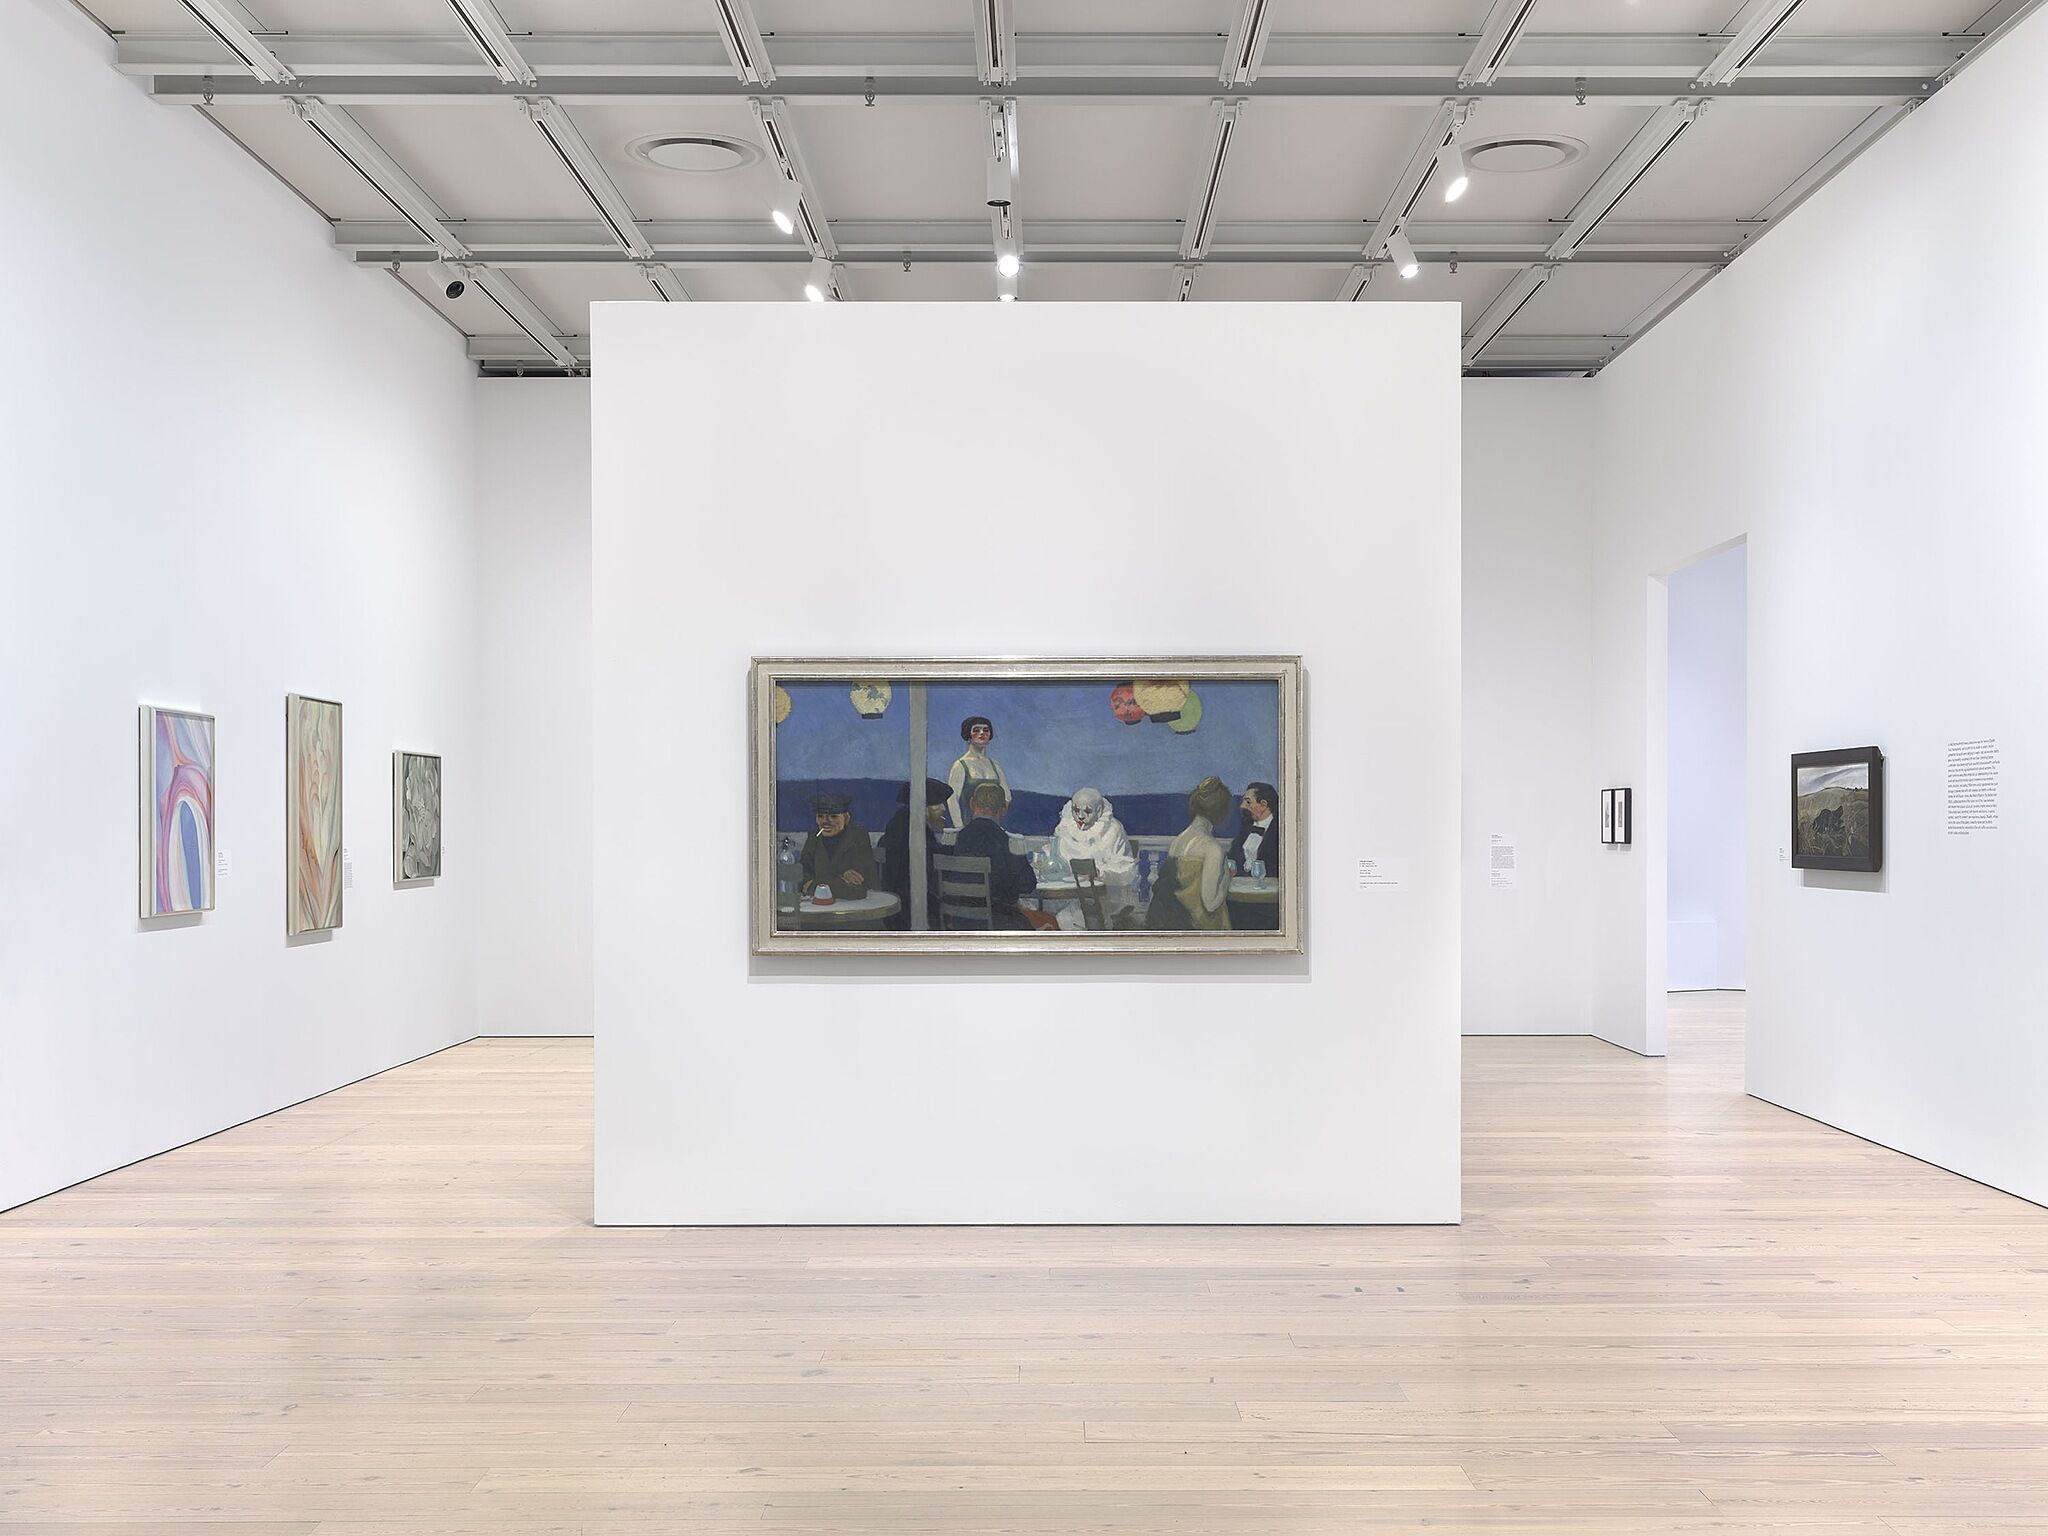 An image of the Whitney galleries with paintings